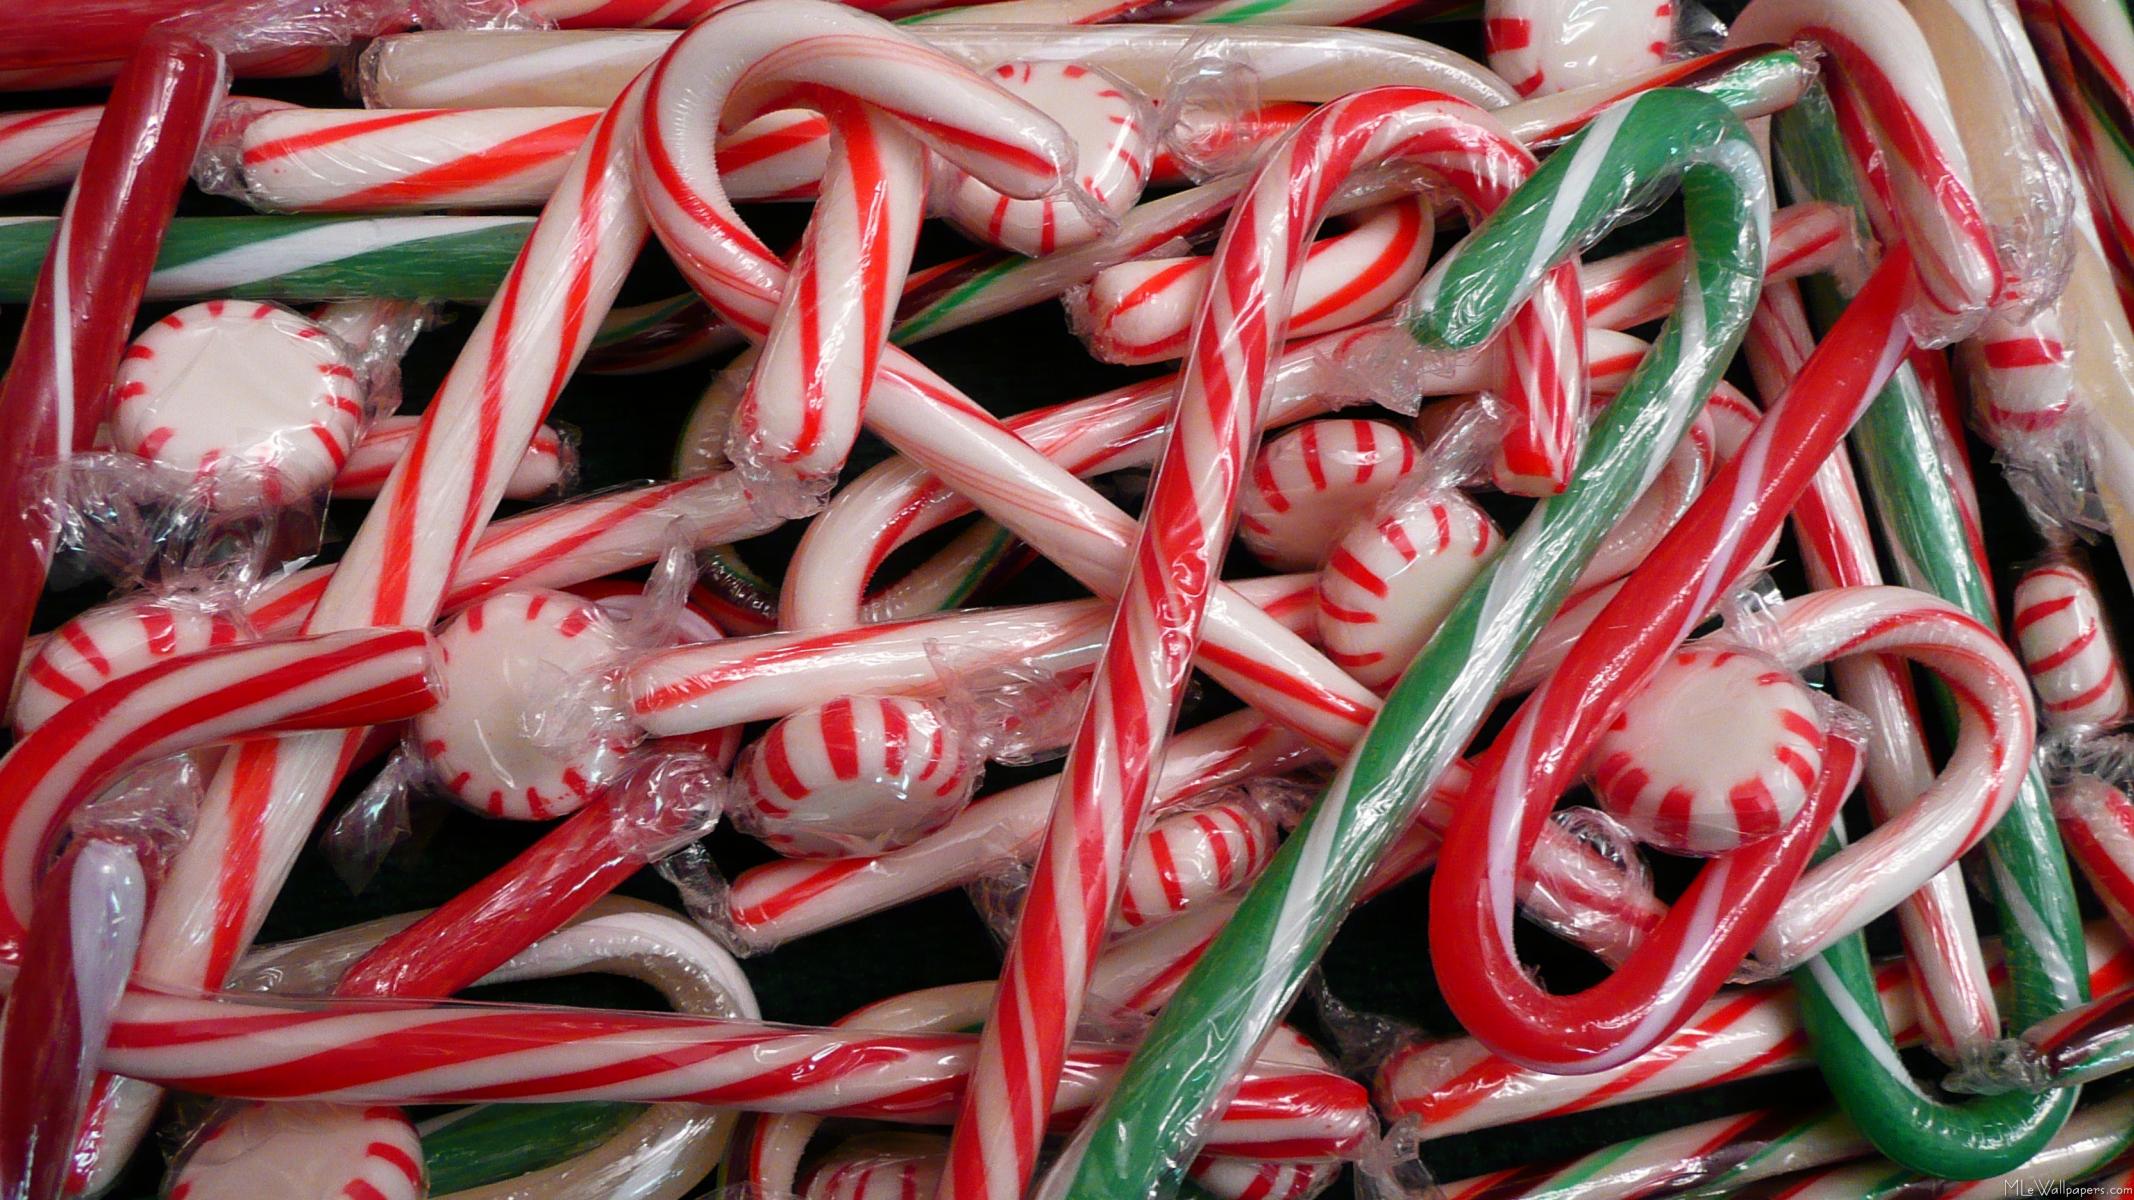 MLeWallpapers.com - Candy Canes and Peppermints